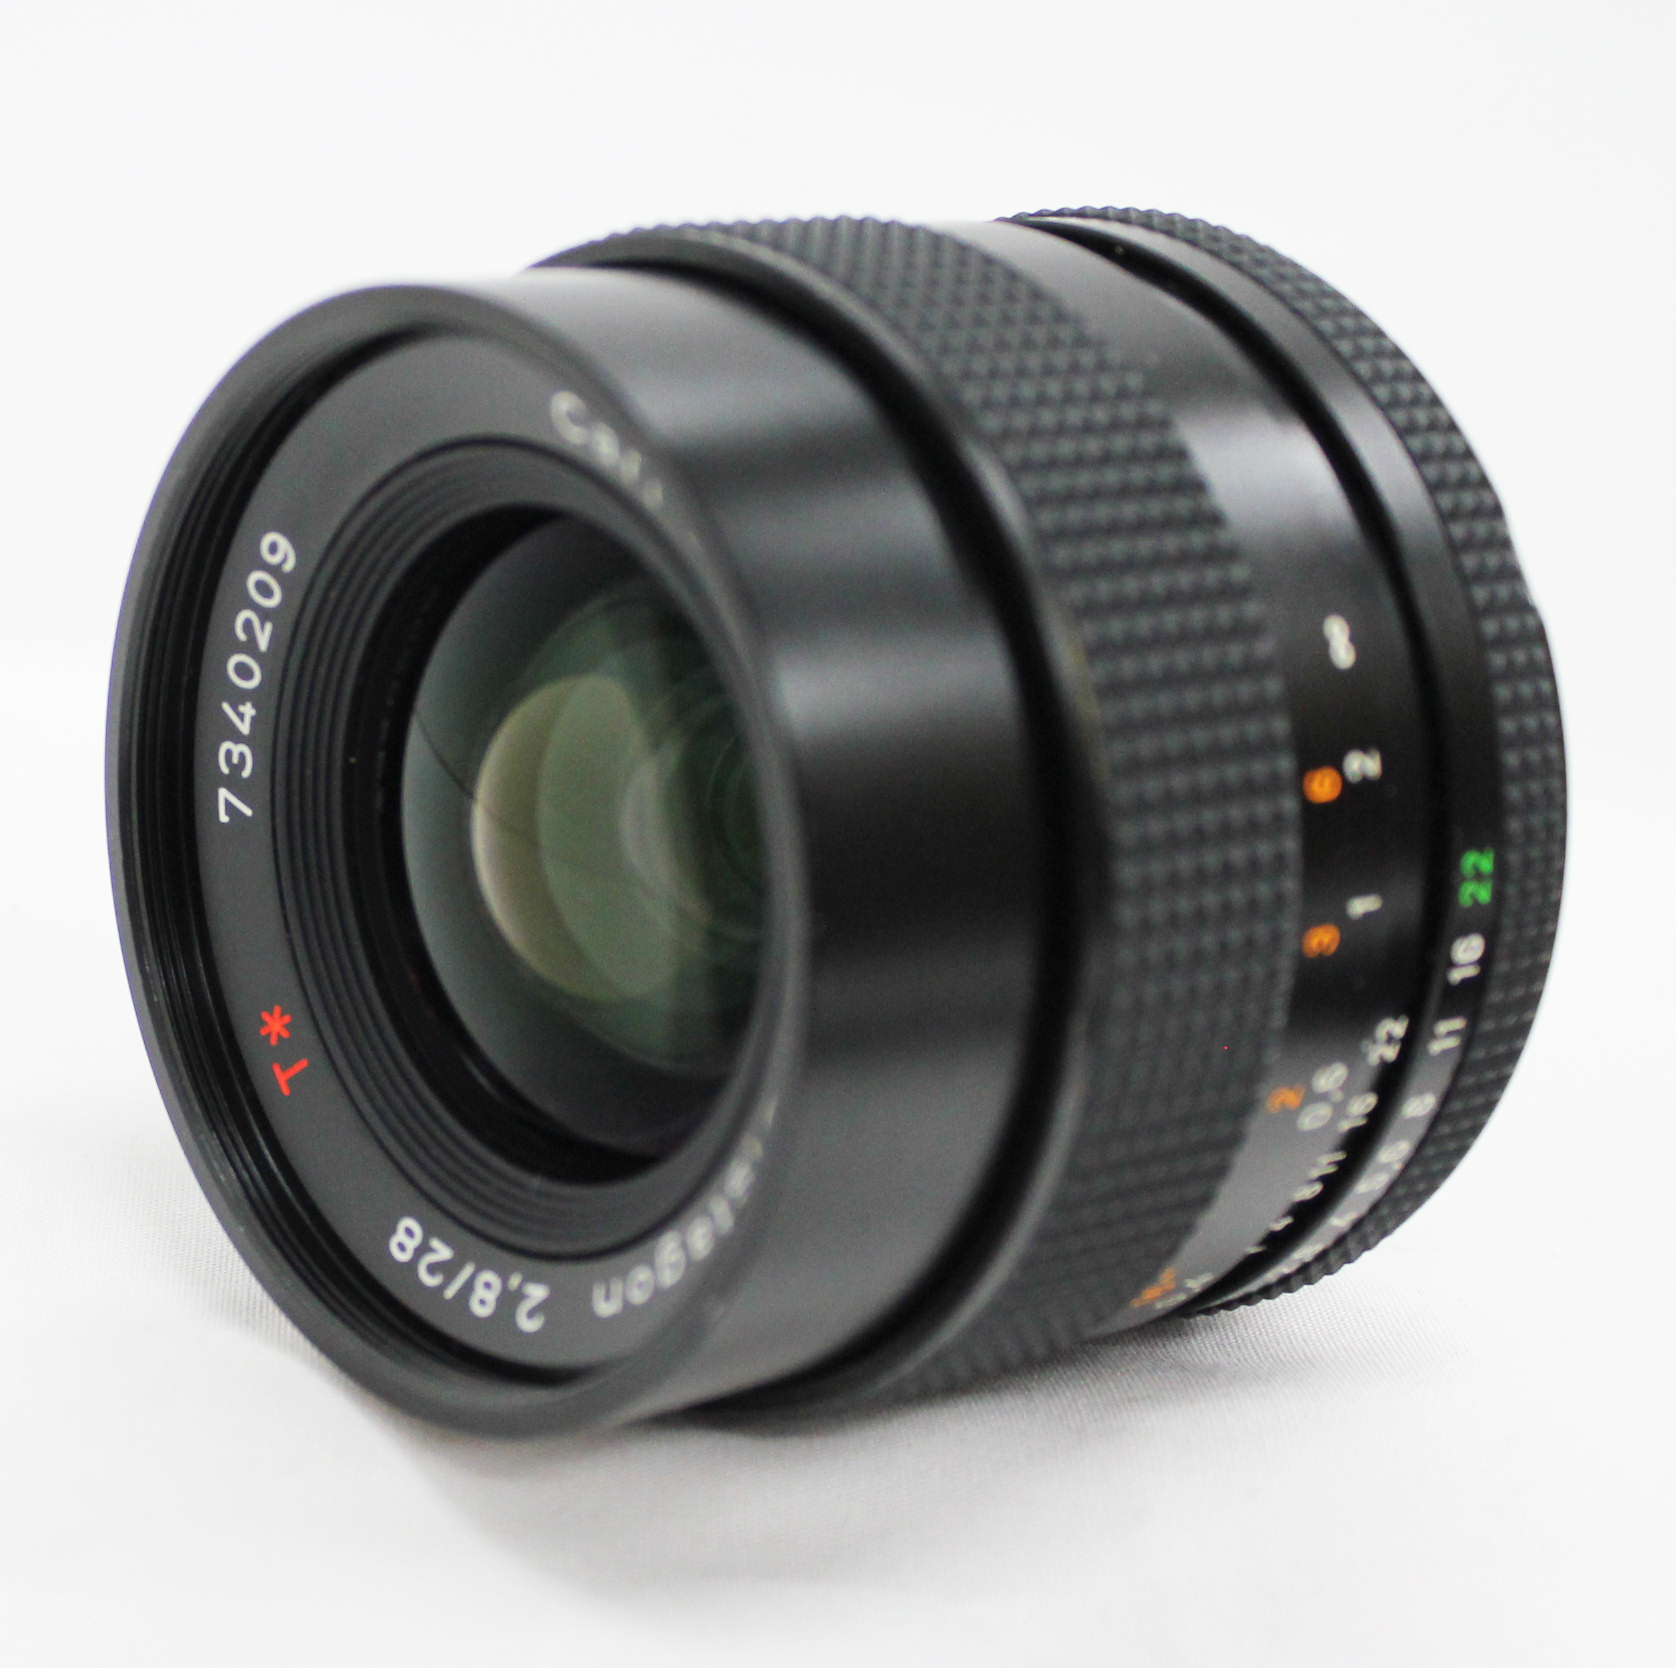  Contax Carl Zeiss Distagon T* 28mm F2.8 MMJ Lens CY Y/C Mount from Japan Photo 1